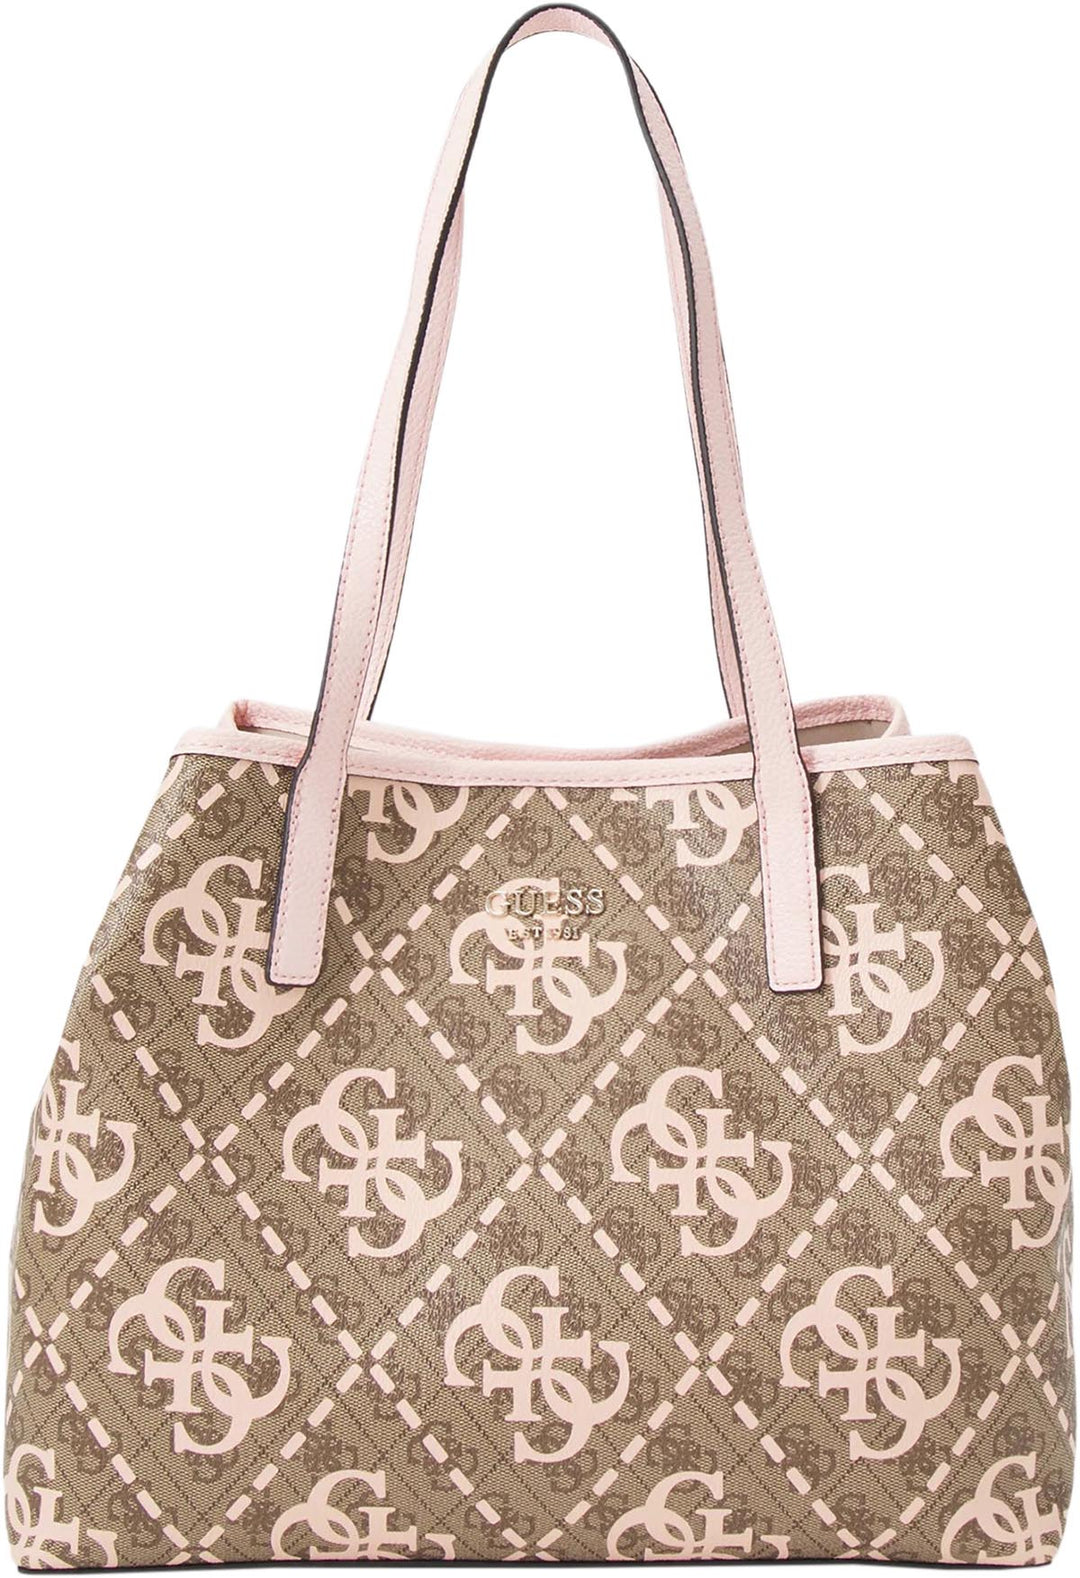 Guess Vikky Large Tote 2 in 1 Bag In Brown Pink For Women